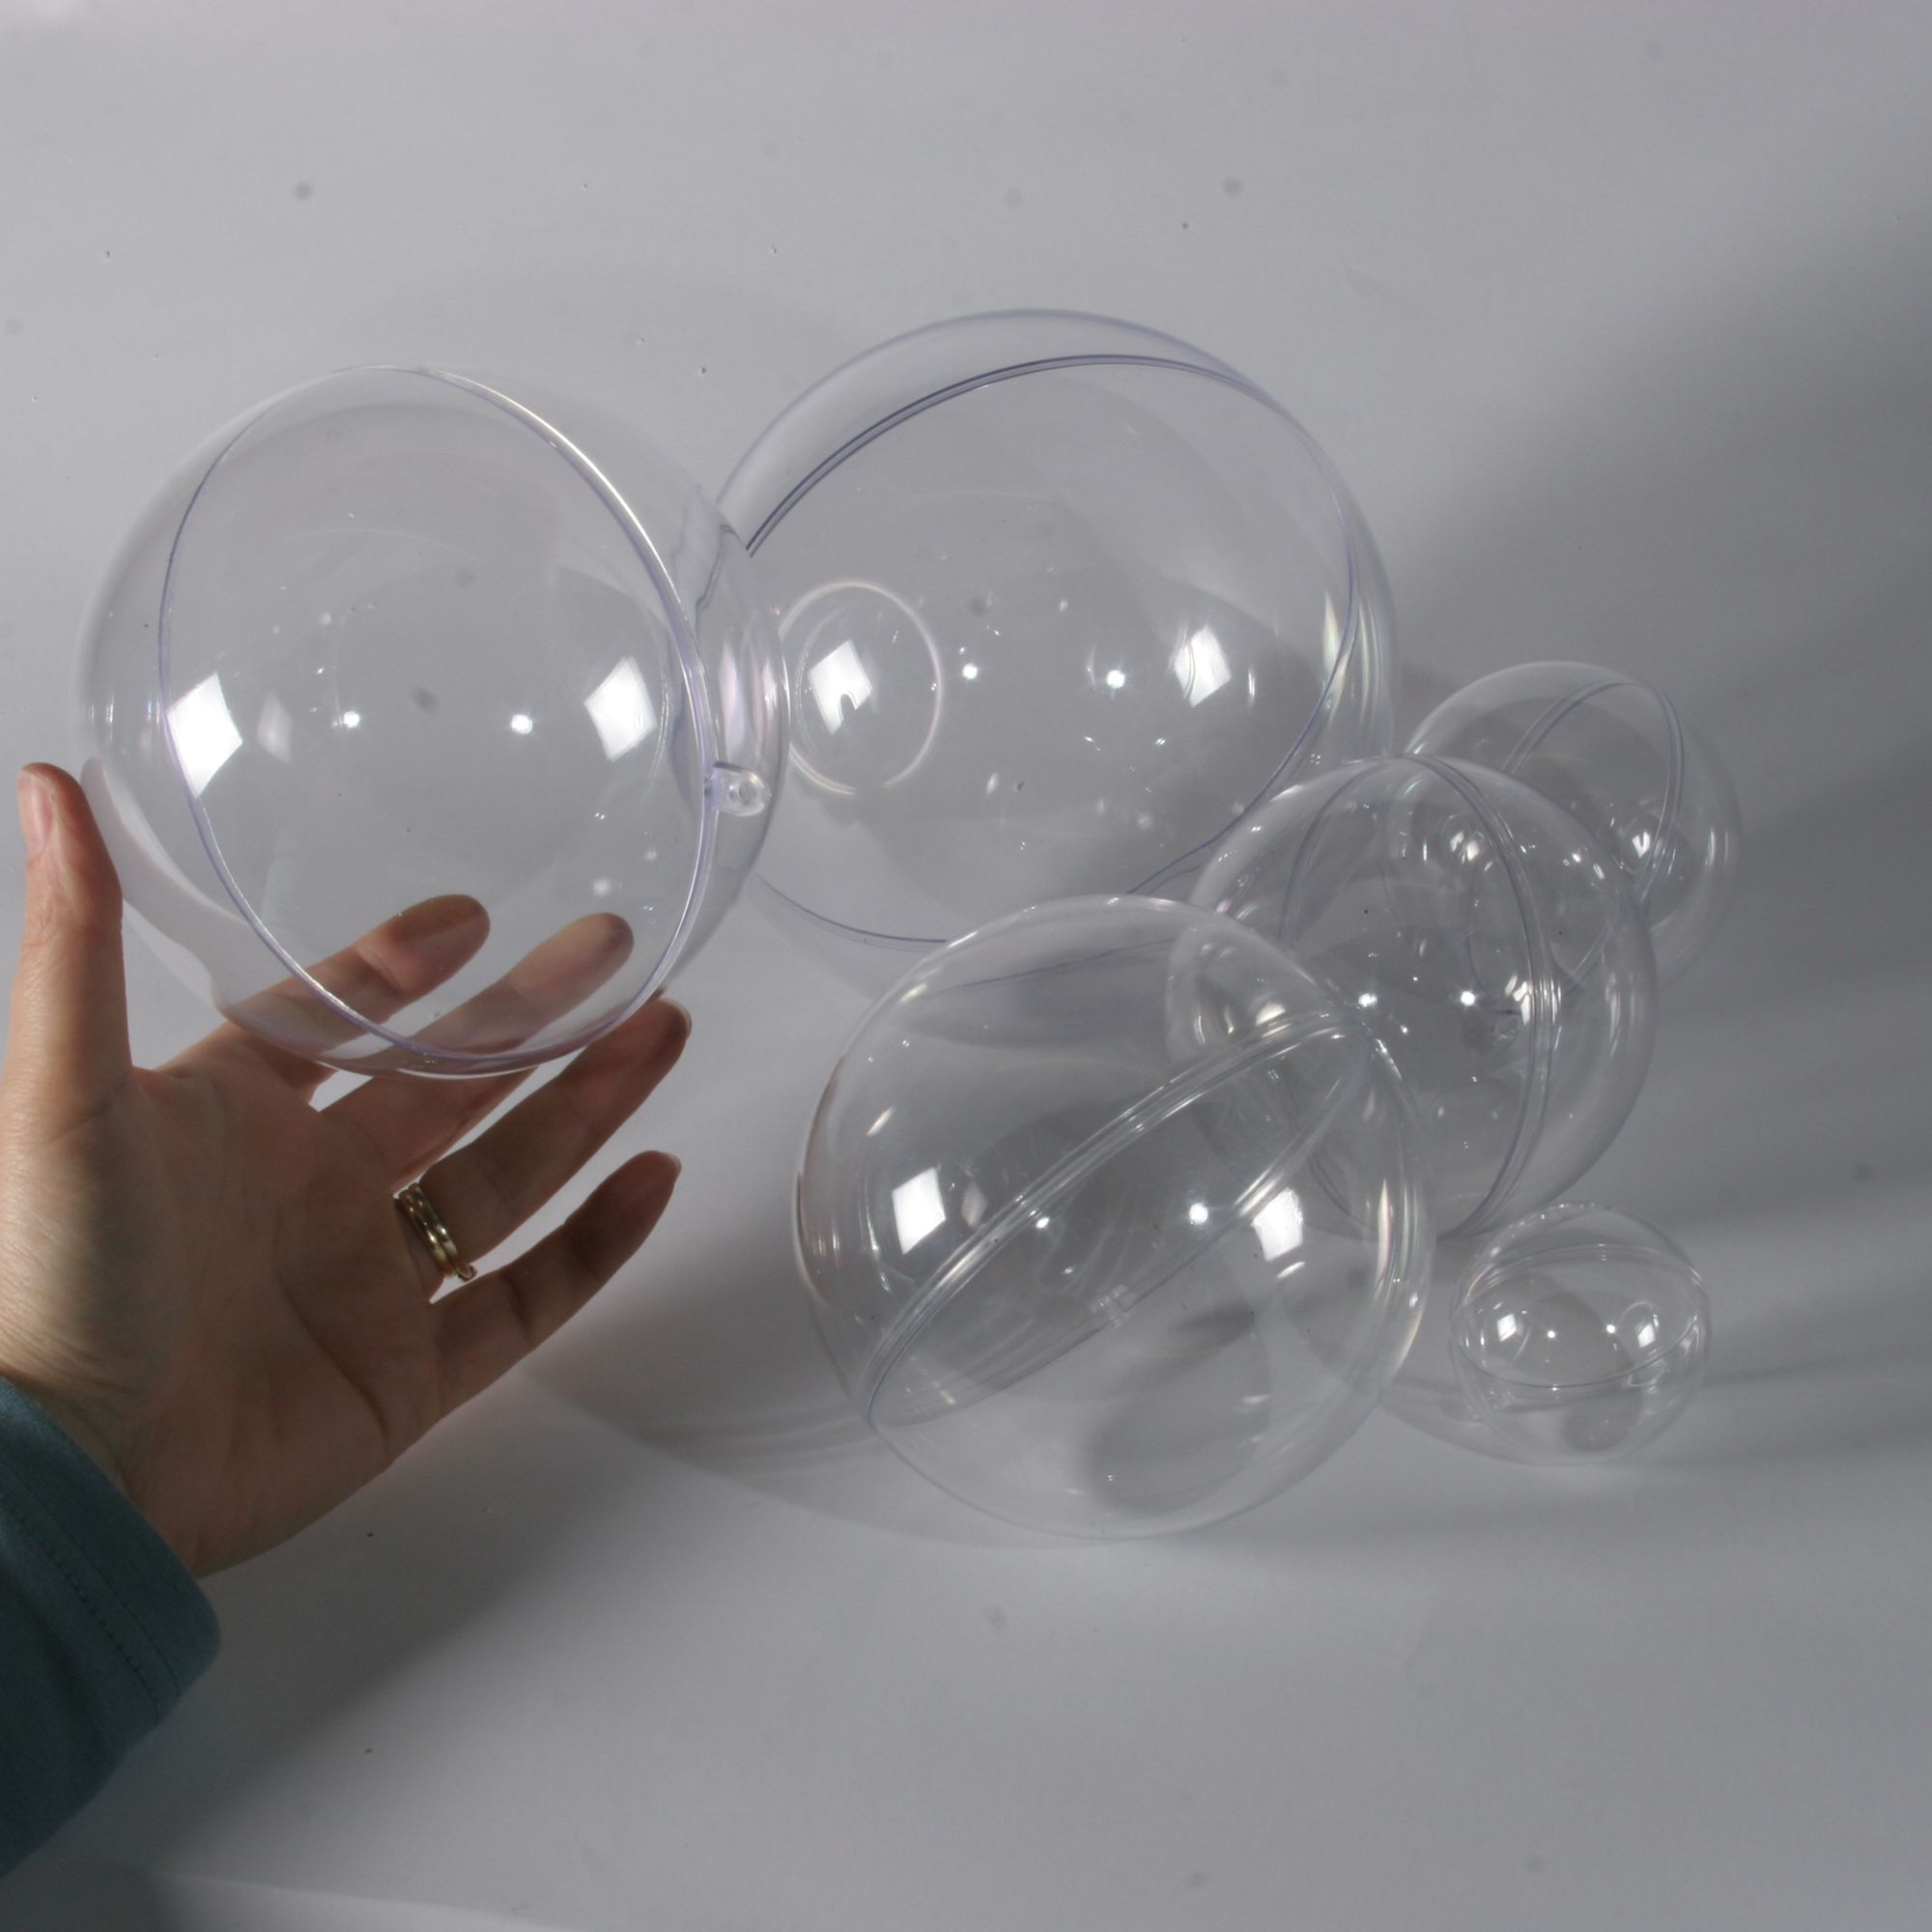 clear plastic spheres hollow